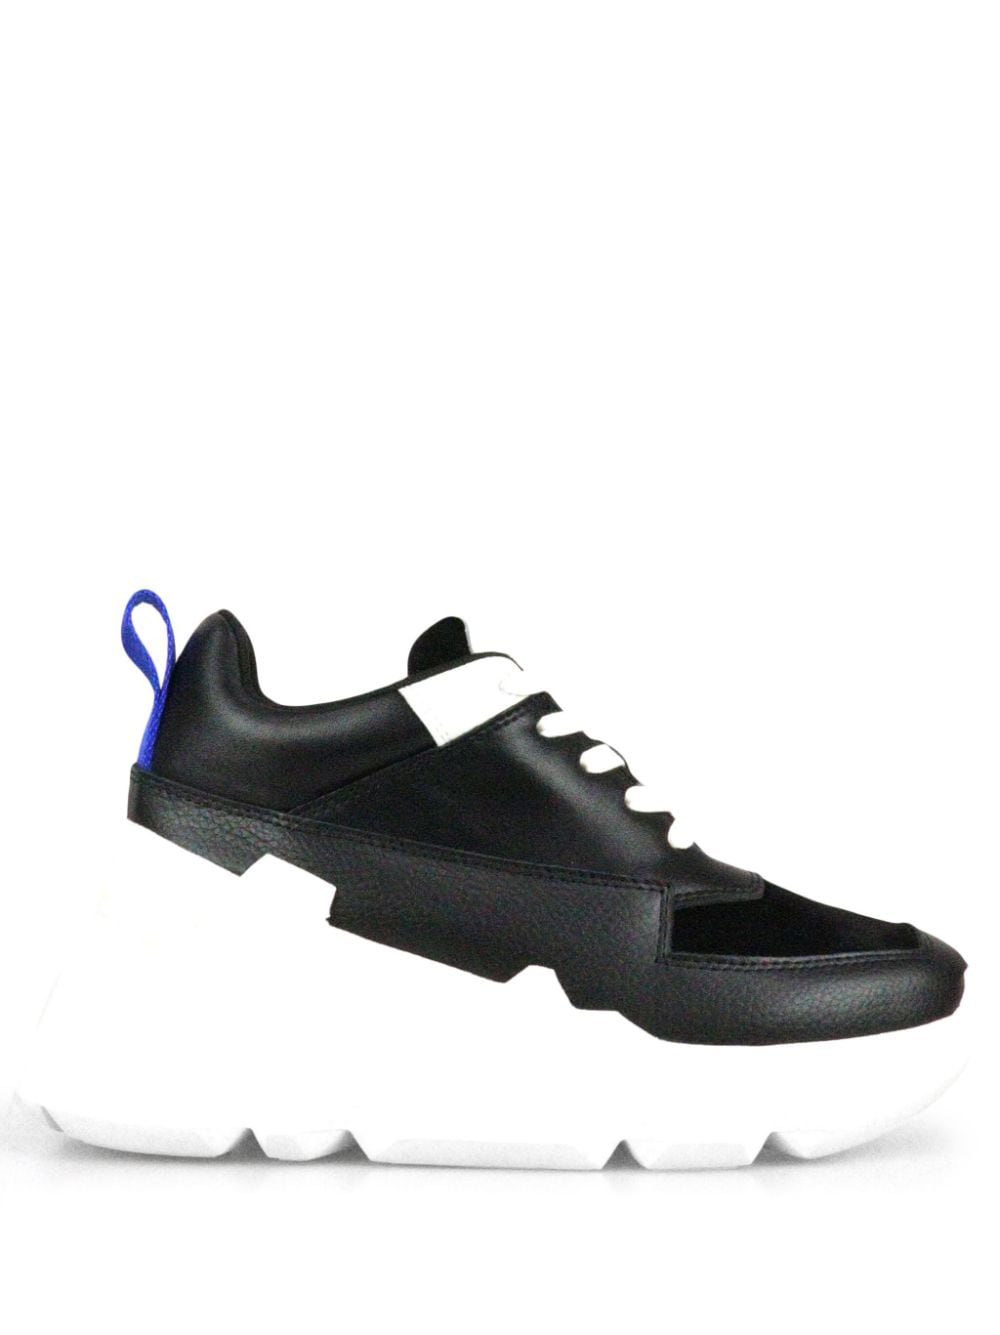 Space Kick Max leather sneakers